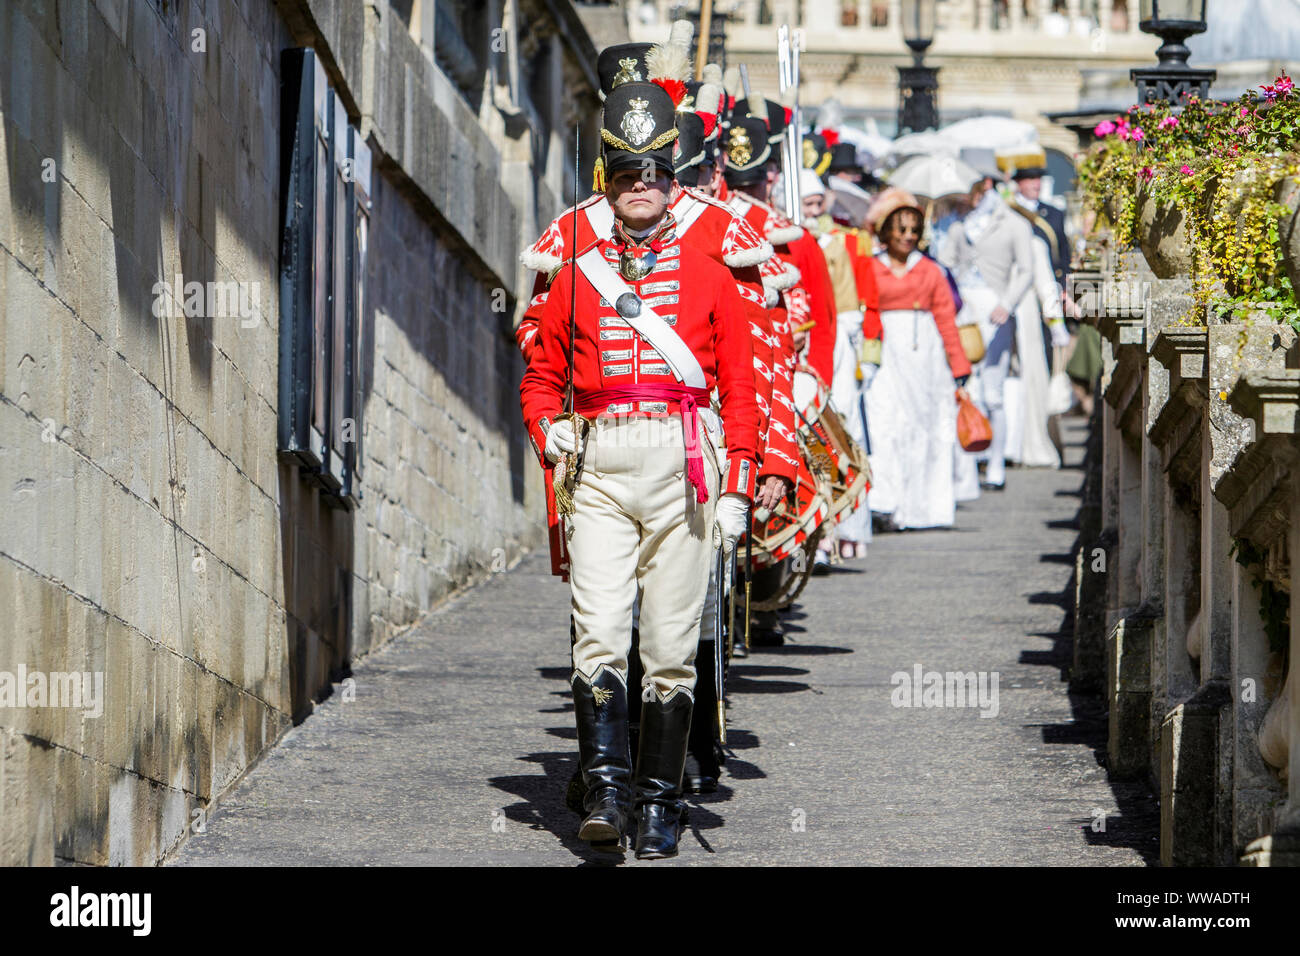 Bath, Somerset, UK. 14 Sep, 2019. Members of the re-enactment group, His Majesty’s 33rd Regiment of Foot taking part in the world famous Grand Regency Costumed Promenade are pictured as they enter Parade Gardens. The Promenade, part of the 10 day Jane Austen Festival is a procession through the streets of Bath and the participants who come from all over the world dress in 18th Century costume. Credit:  Lynchpics/Alamy Live News Stock Photo